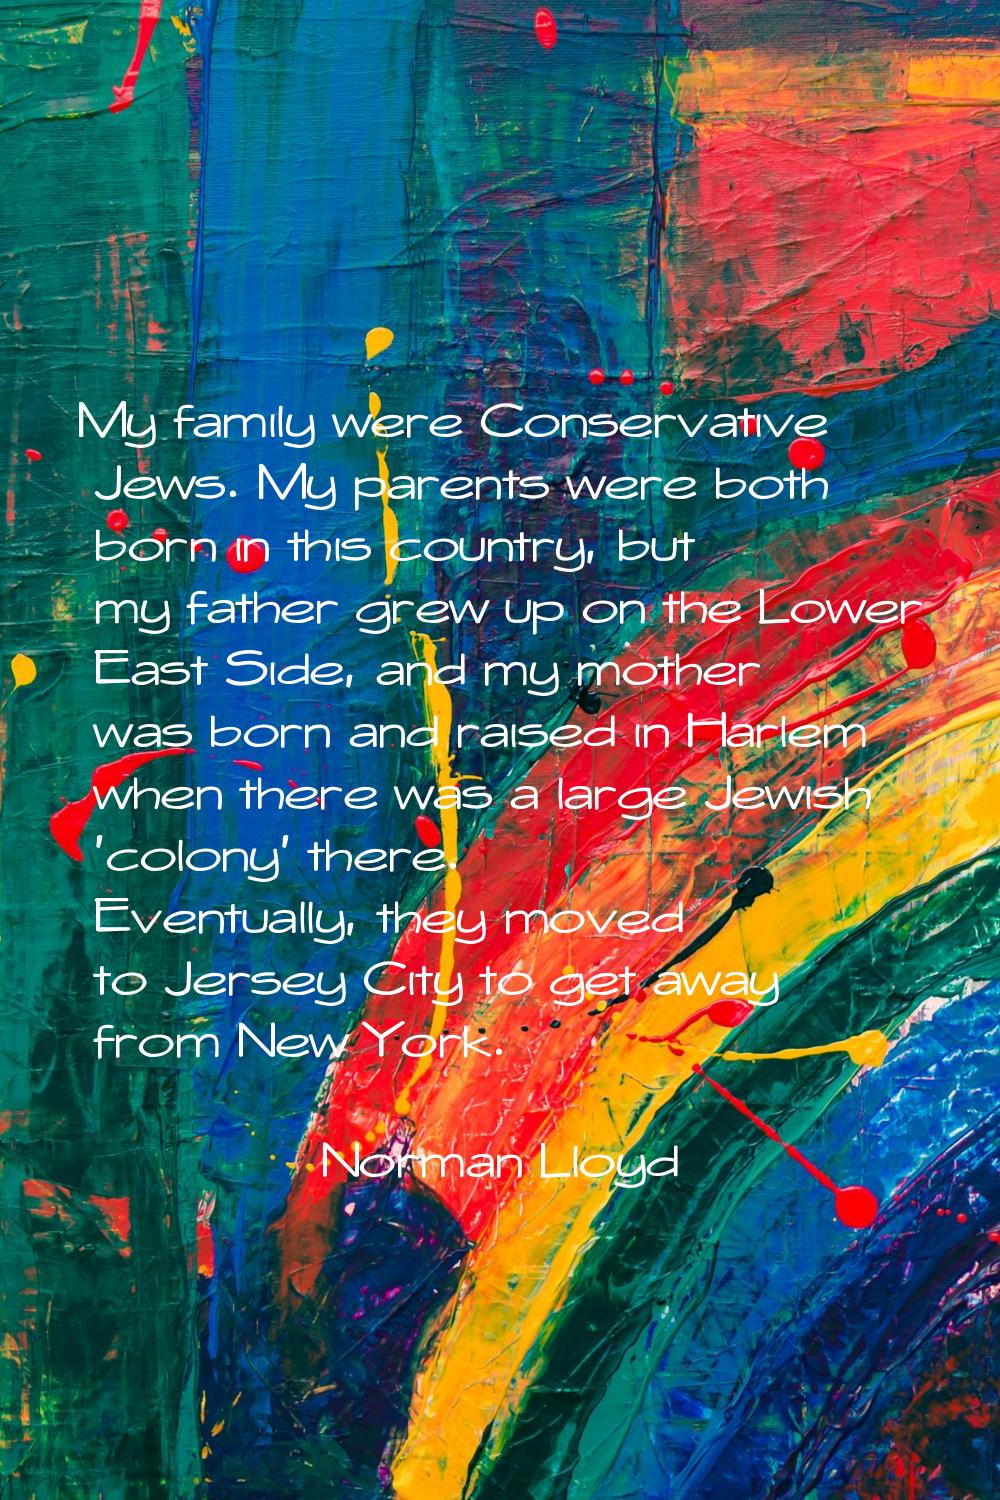 My family were Conservative Jews. My parents were both born in this country, but my father grew up 